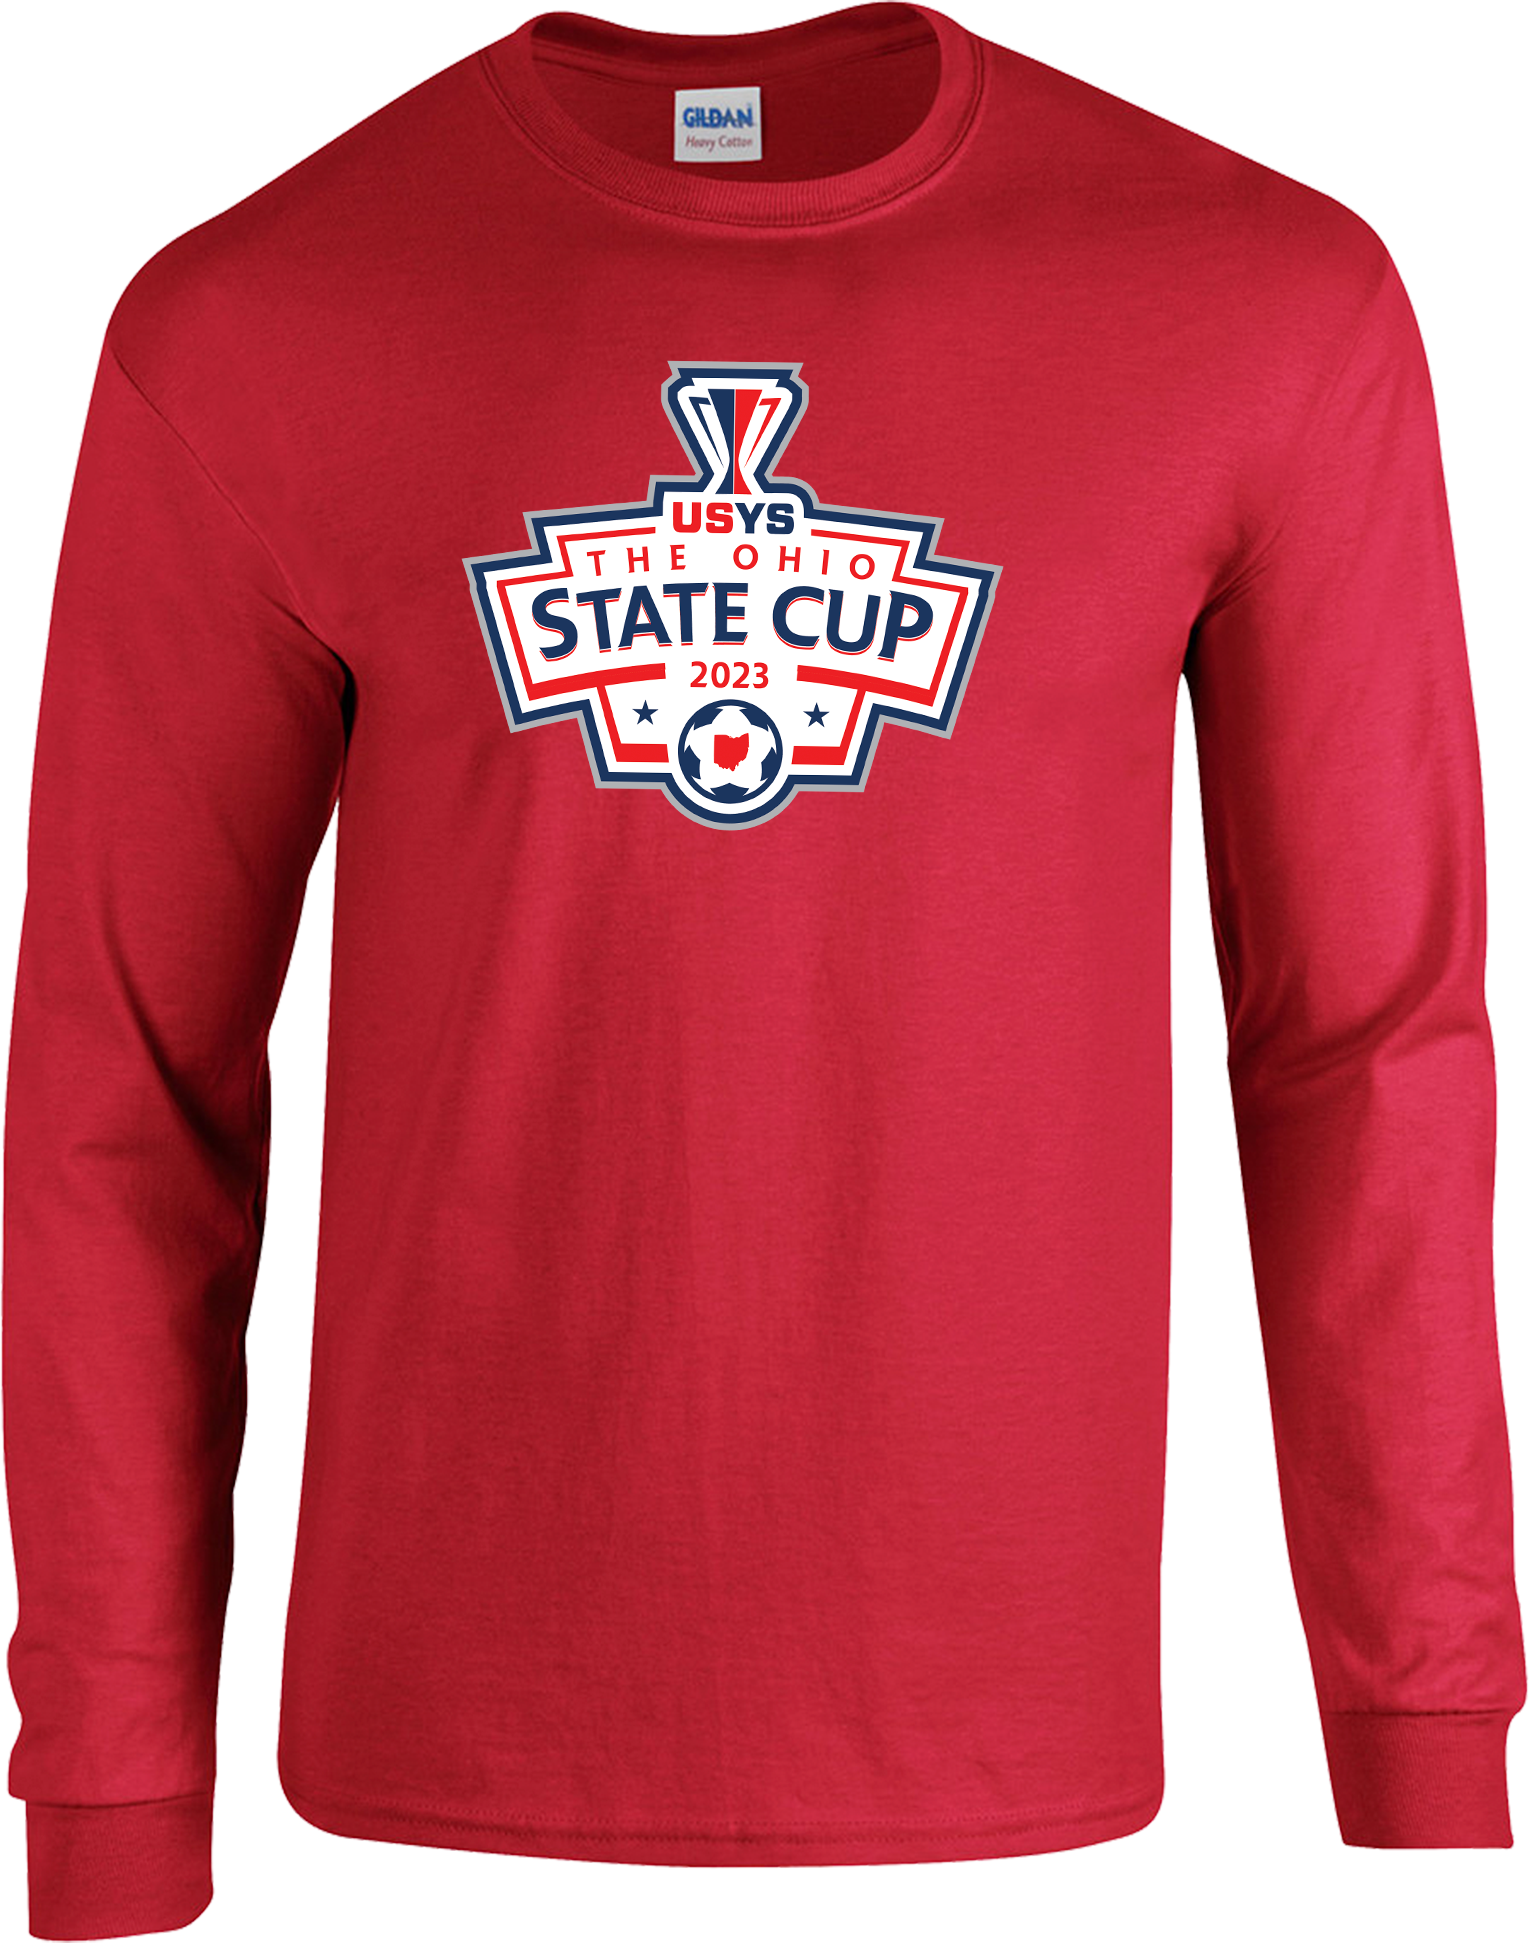 LONG SLEEVES - 2023 USYS The Ohio State Cup